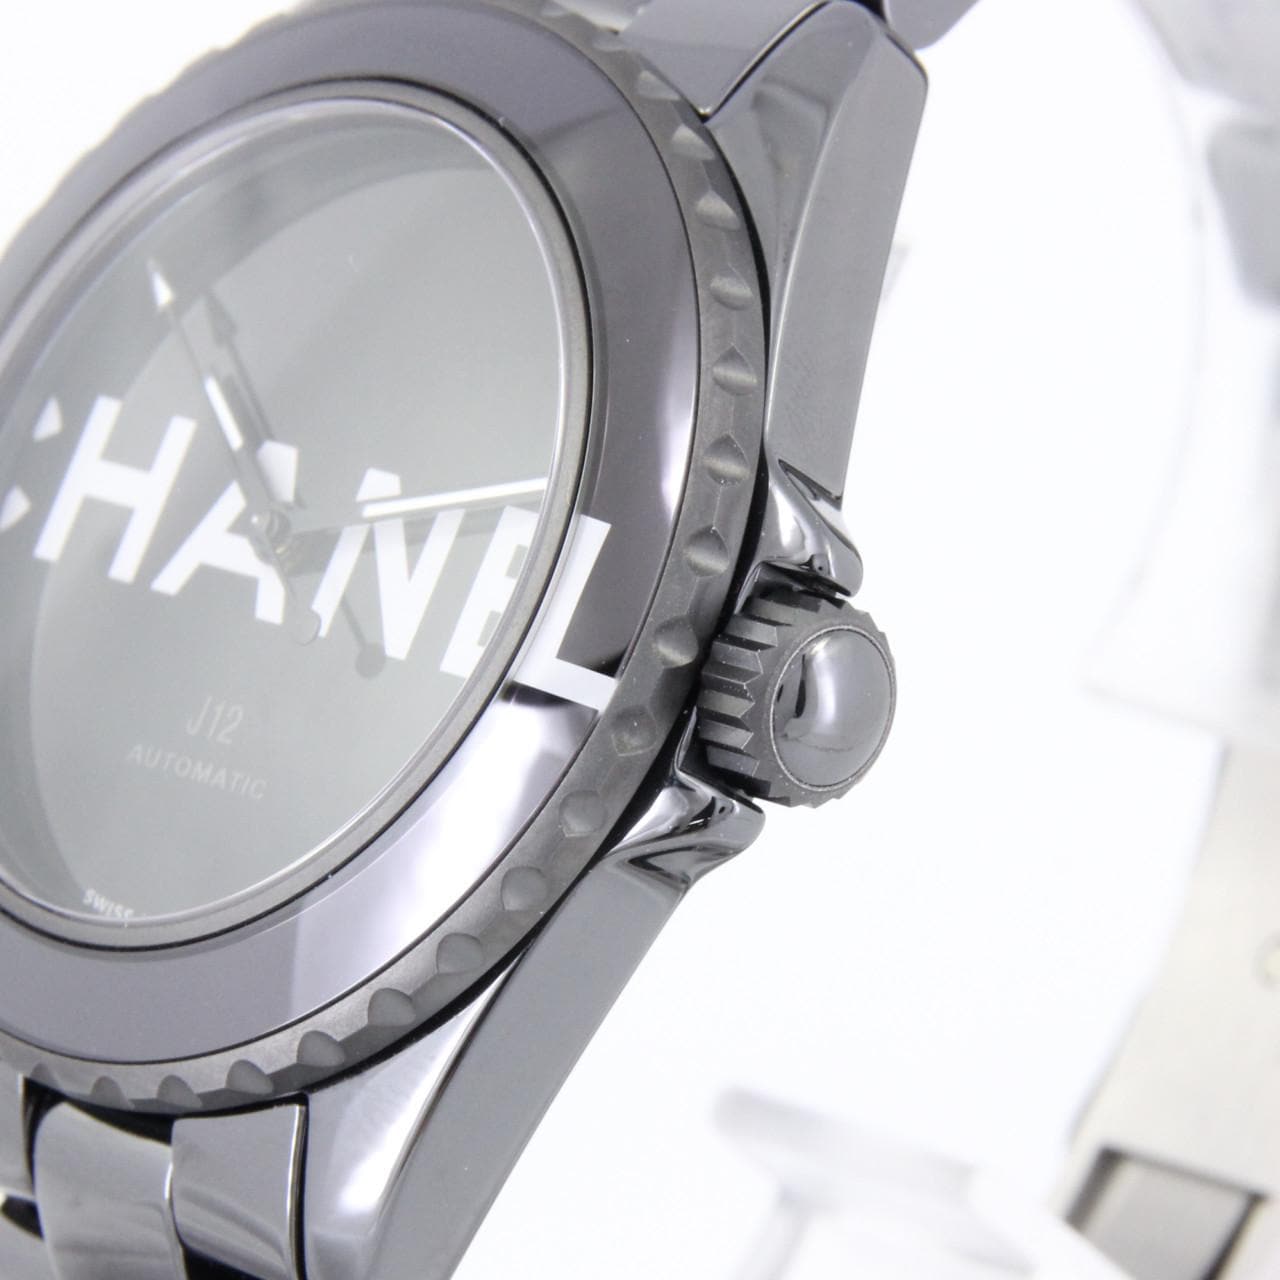 CHANEL J12 Wanted Du CHANEL 38mm Ceramic LIMITED H7418 Ceramic Automatic